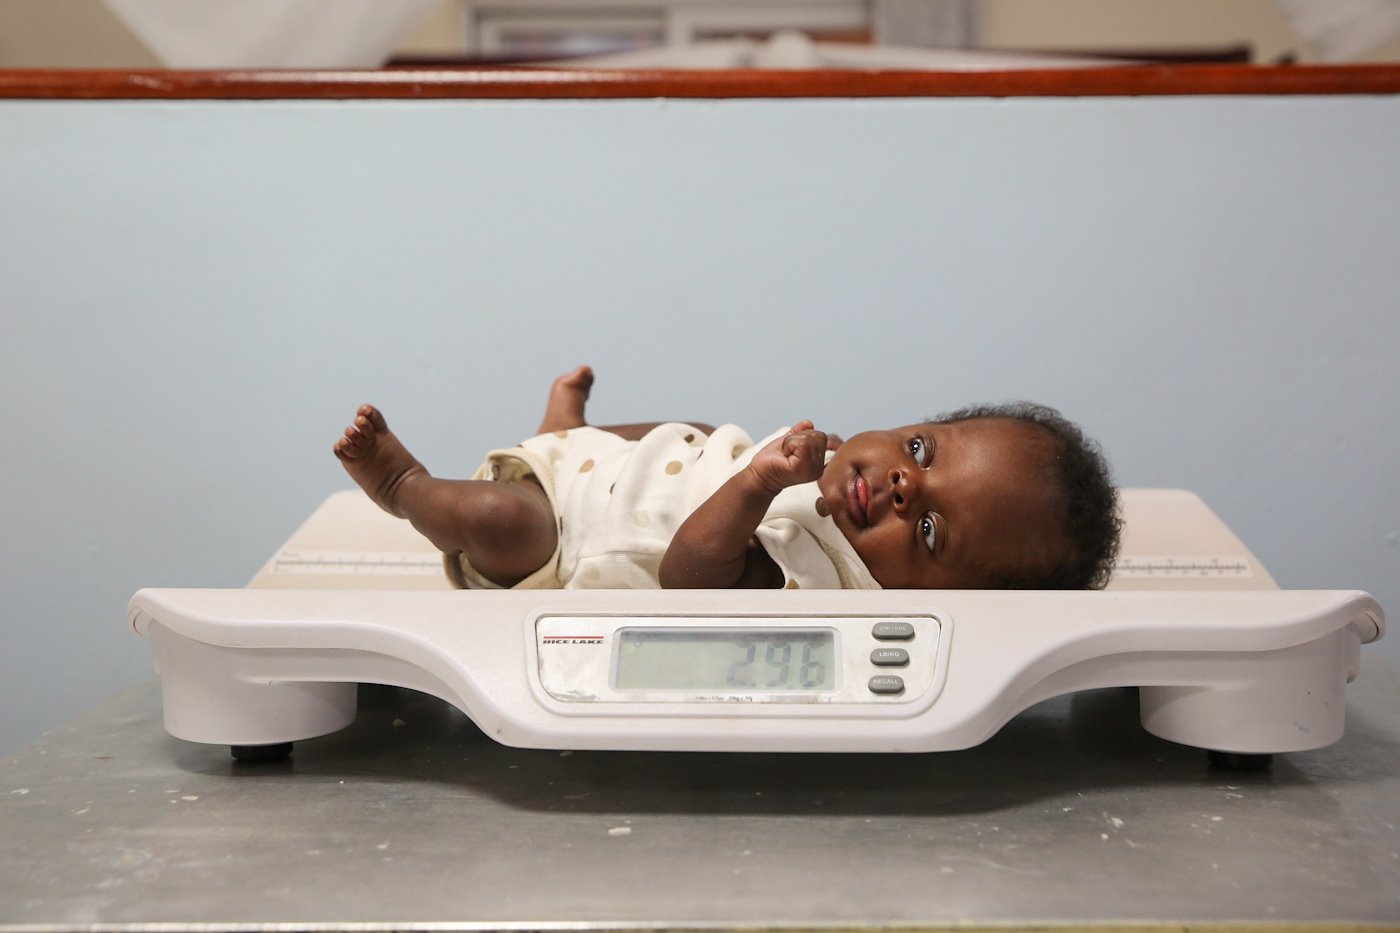 Taking a child's weight is one very important vital, it helps us know how much medicine should be administered.